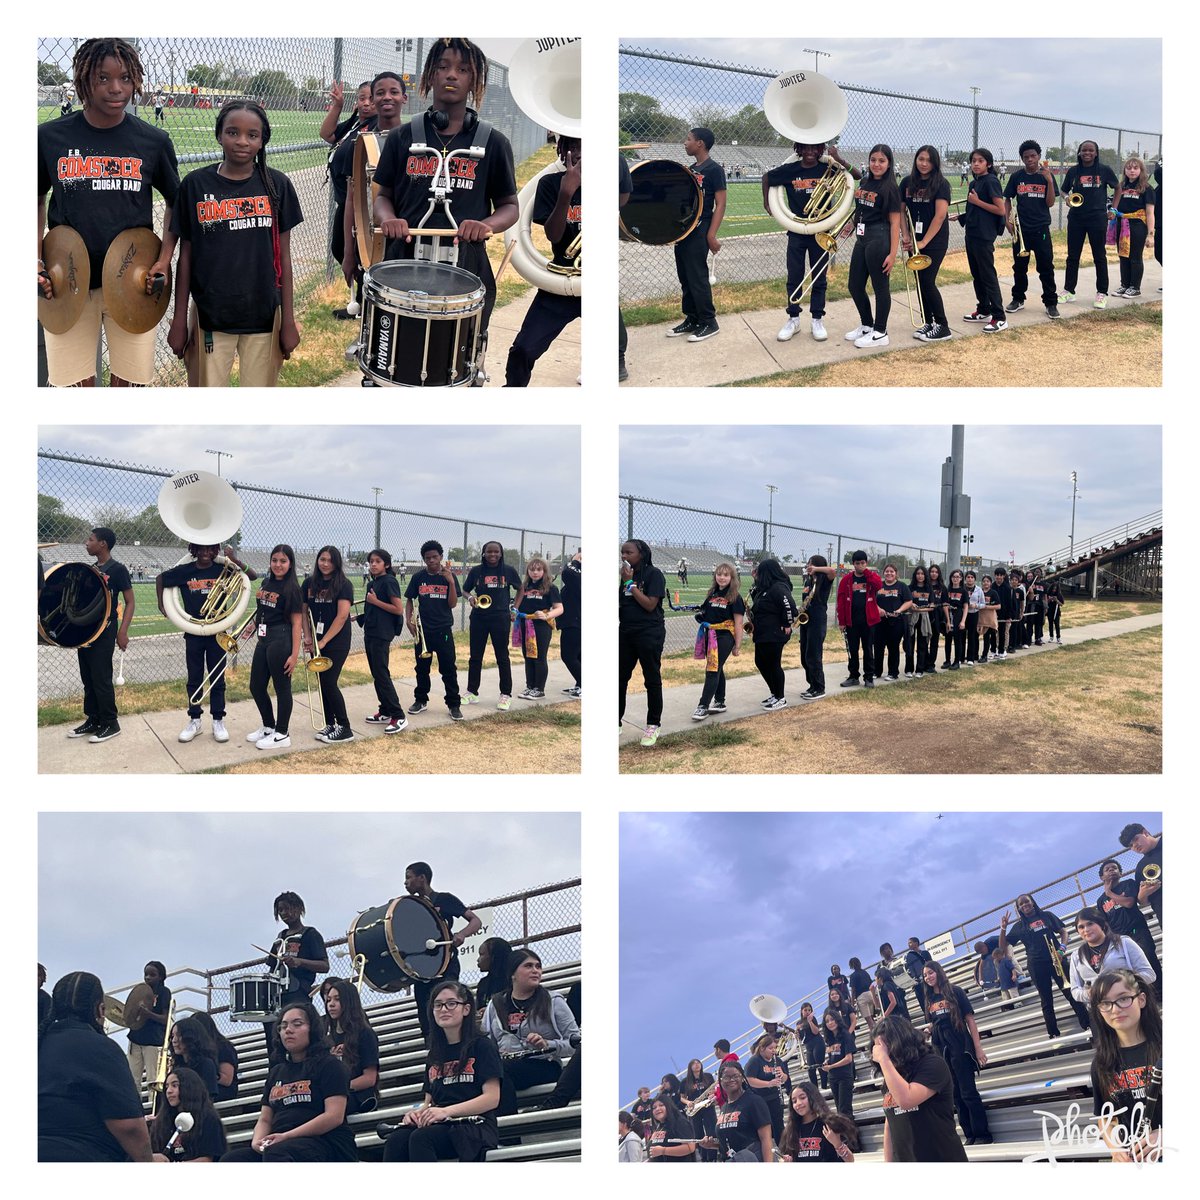 What a wonderful way to start off the season! Cougar Nation did not come to play any games! Football, Cheer, Dance, and Band showed up and showed out! We got the W!! @DrAMcCowan @SpruceV_T @dallasschools